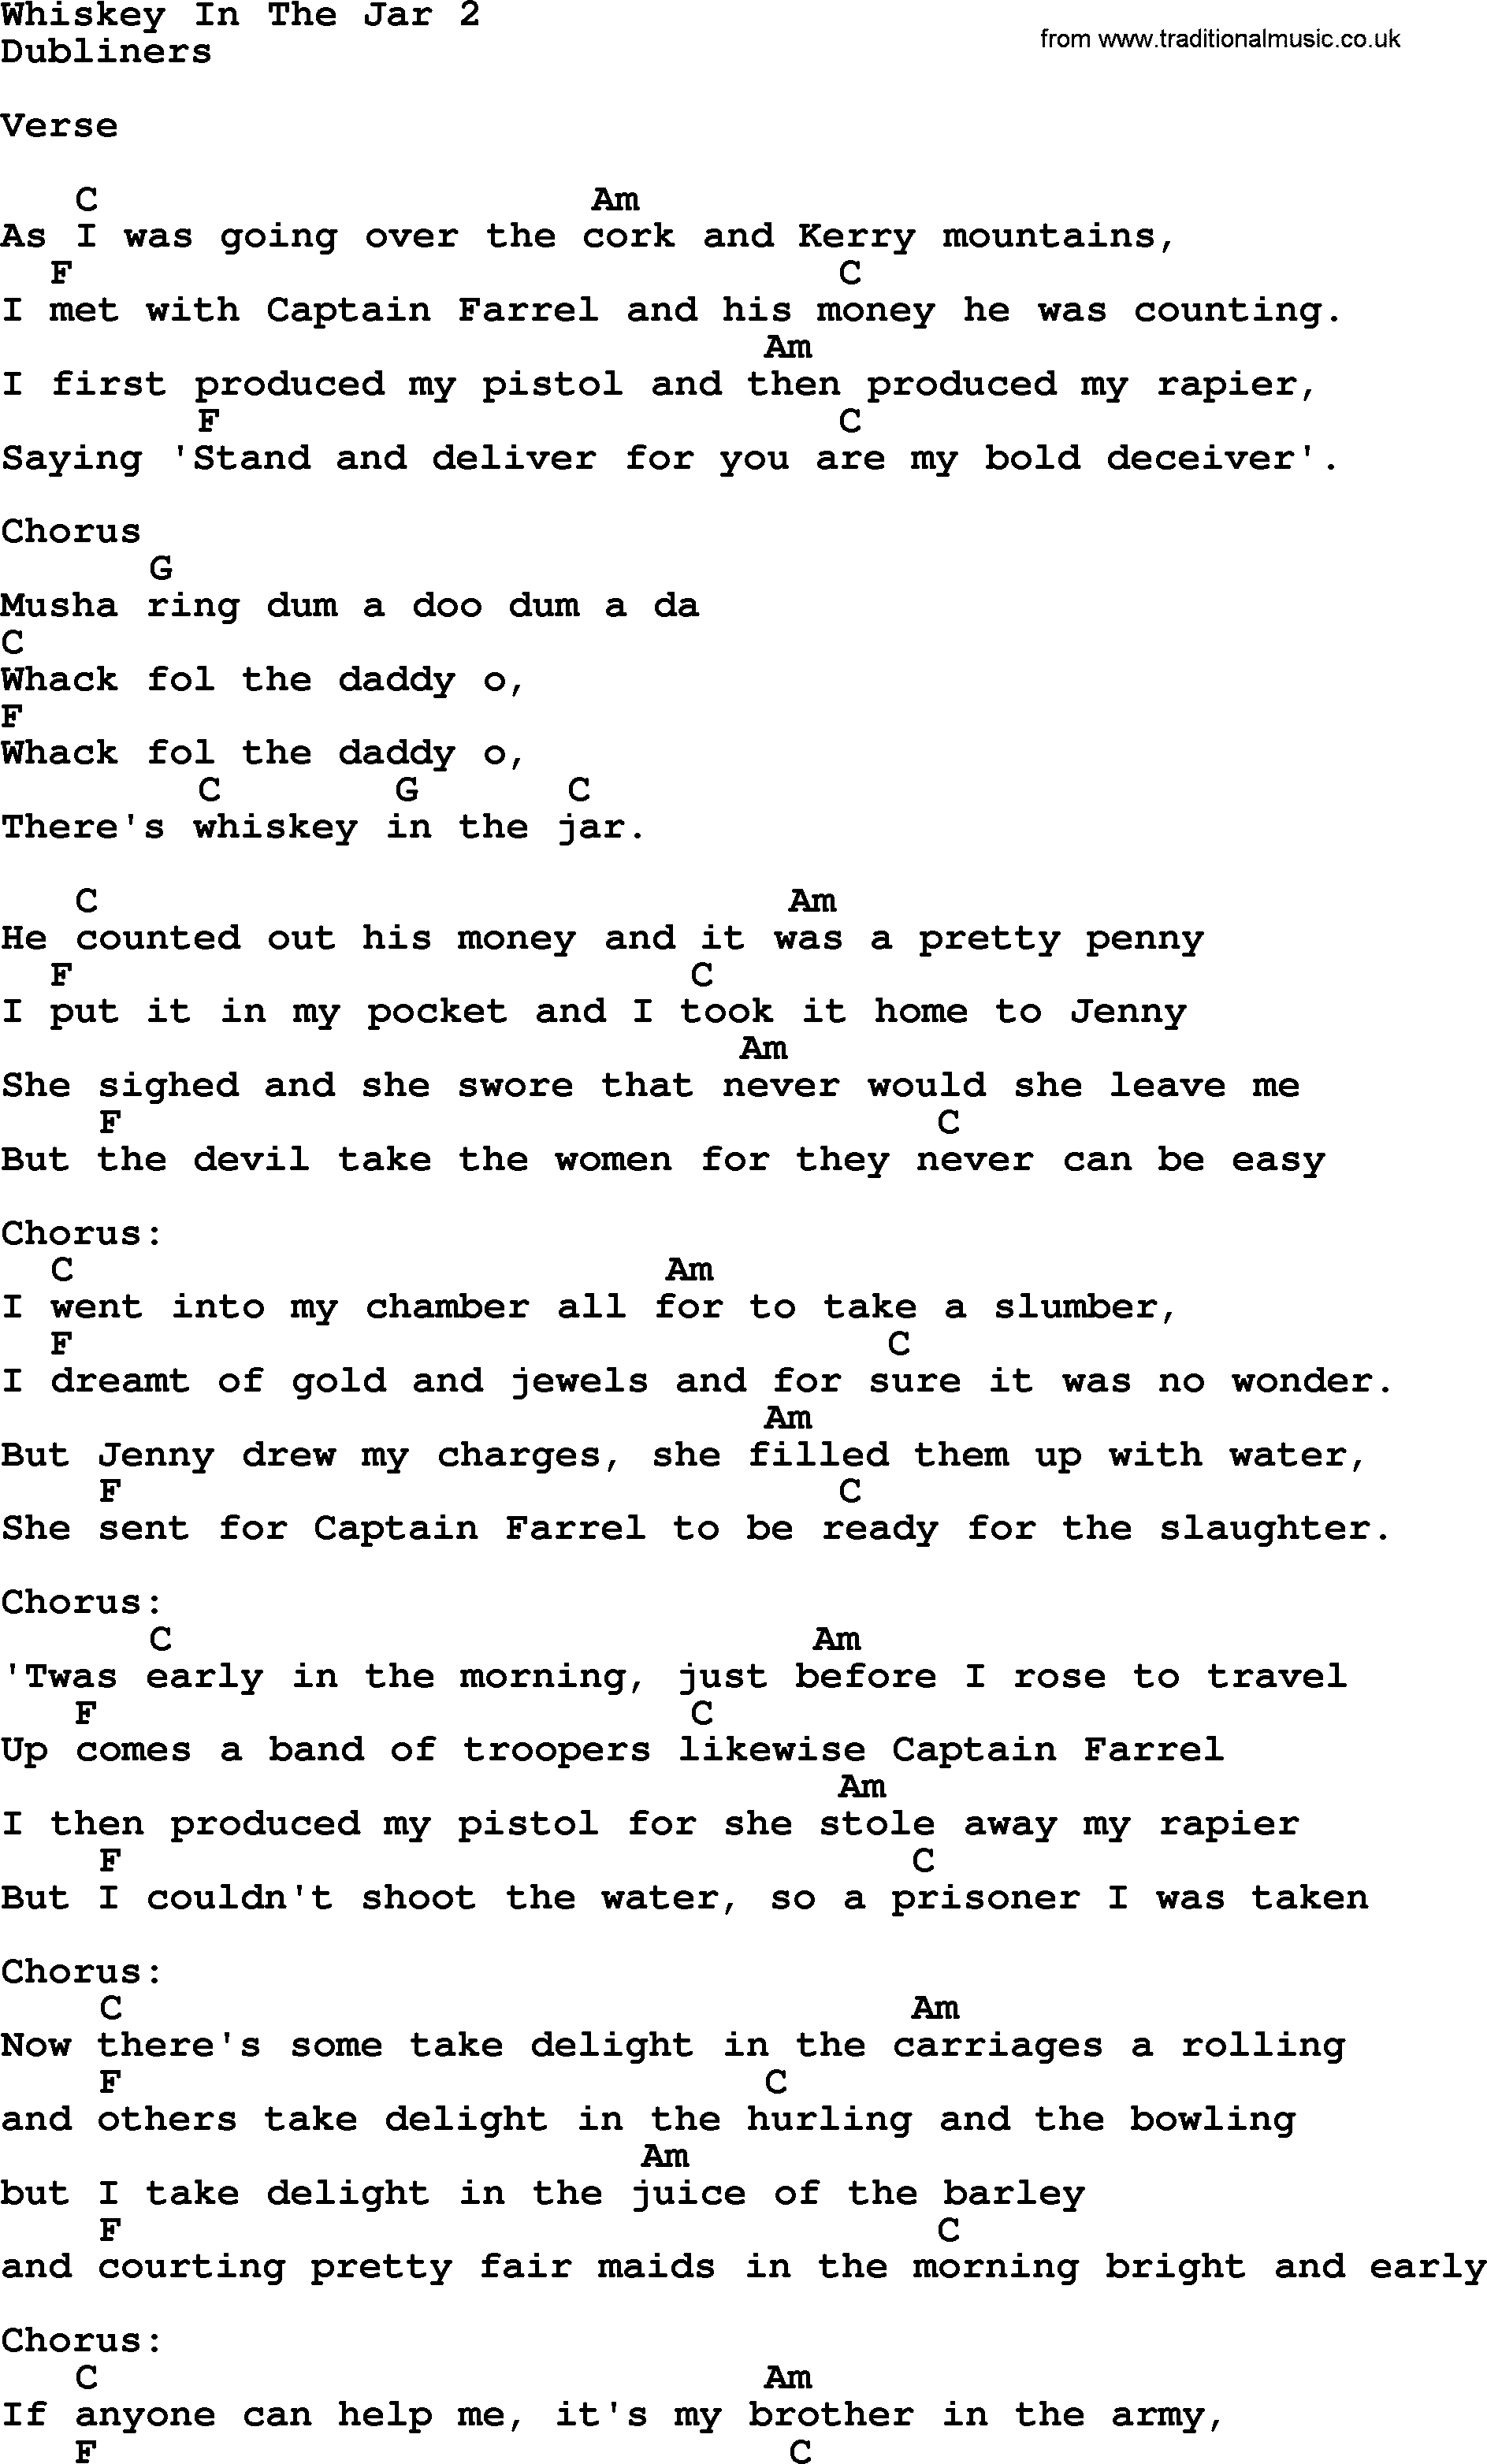 The Dubliners song: Whiskey In The Jar Ver2, lyrics and chords